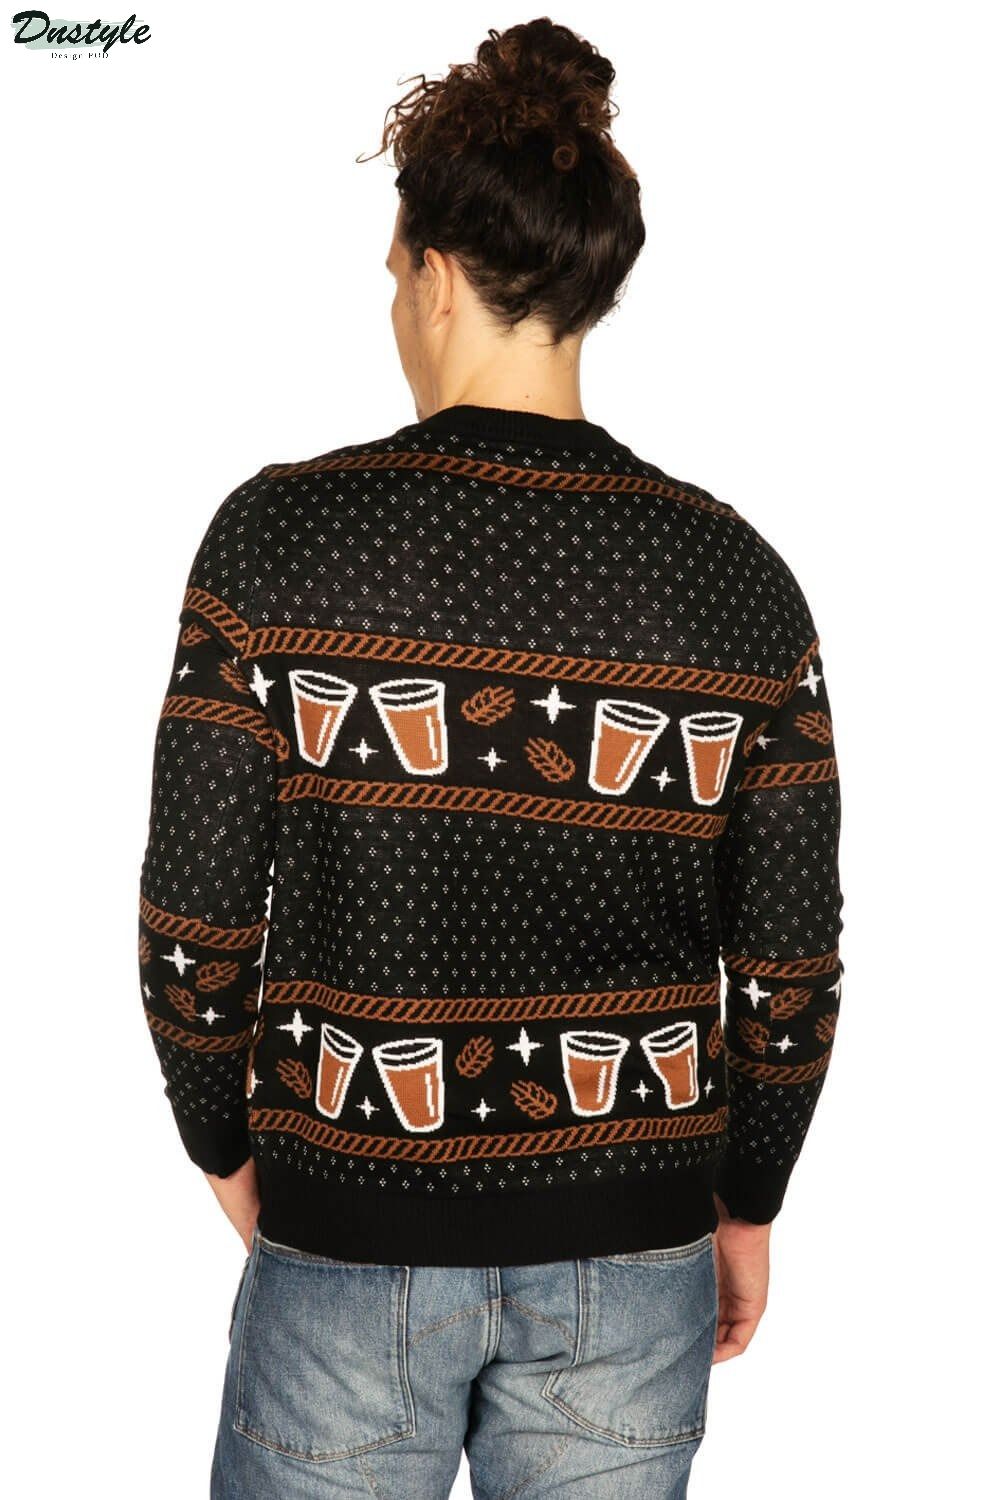 Ballast Point Ugly Christmas Sweater 2